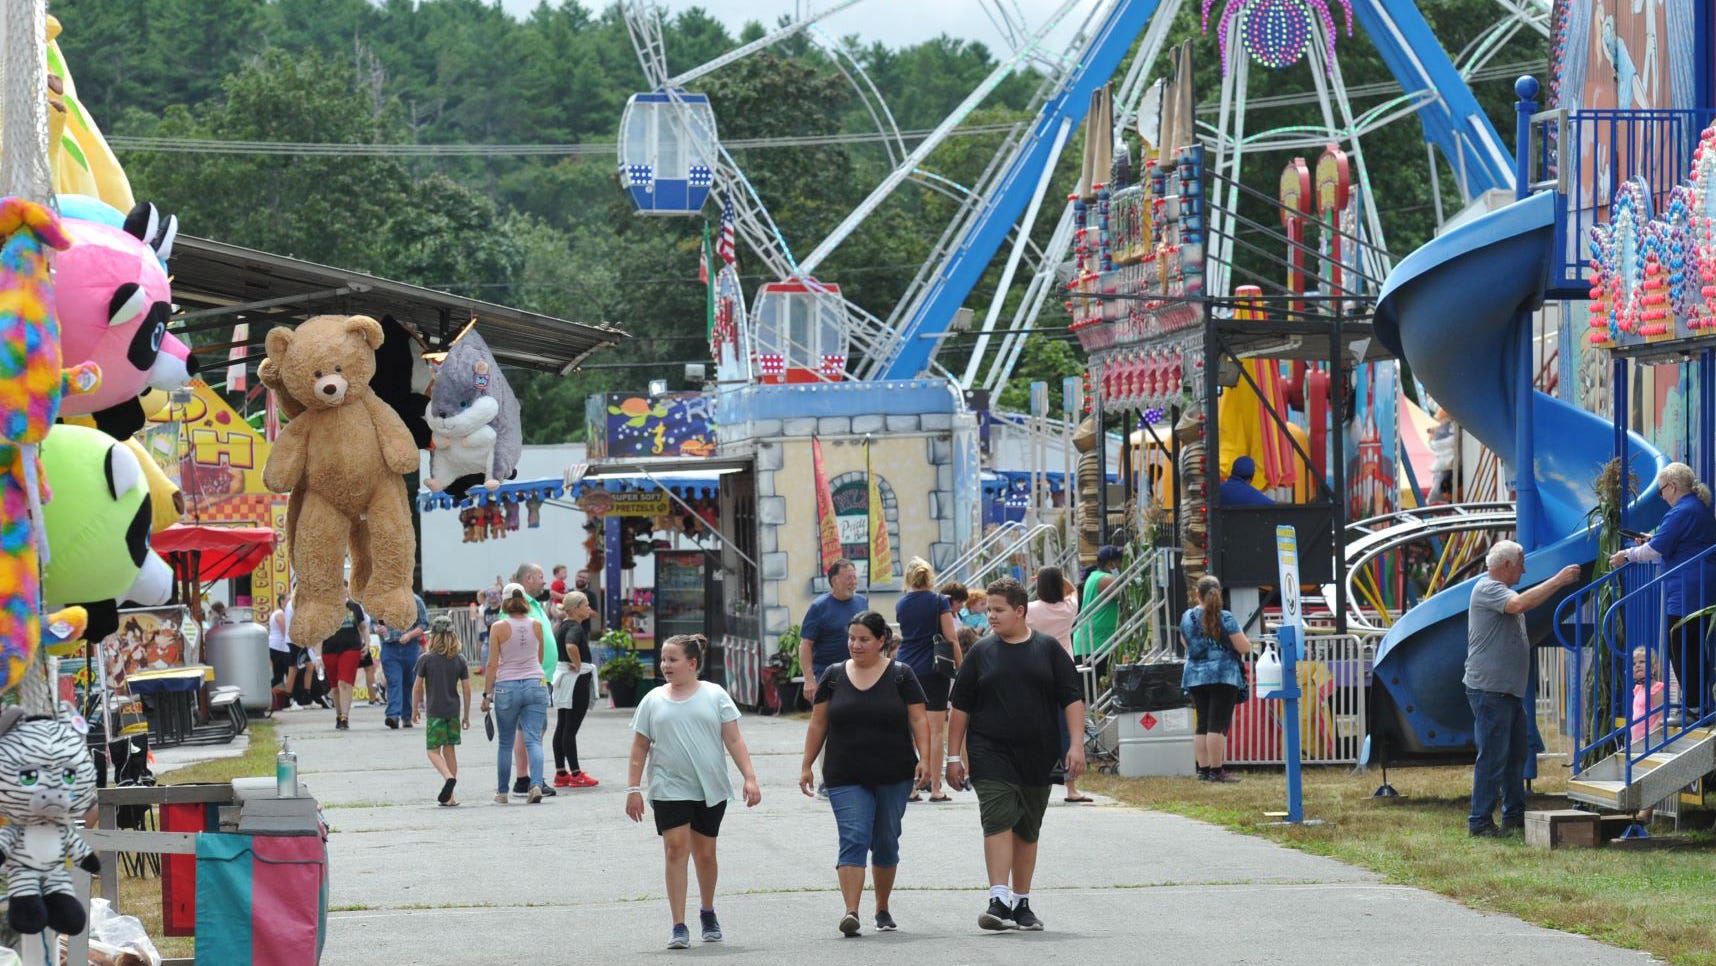 Marshfield Fair to add attractions for foodies, country music fans